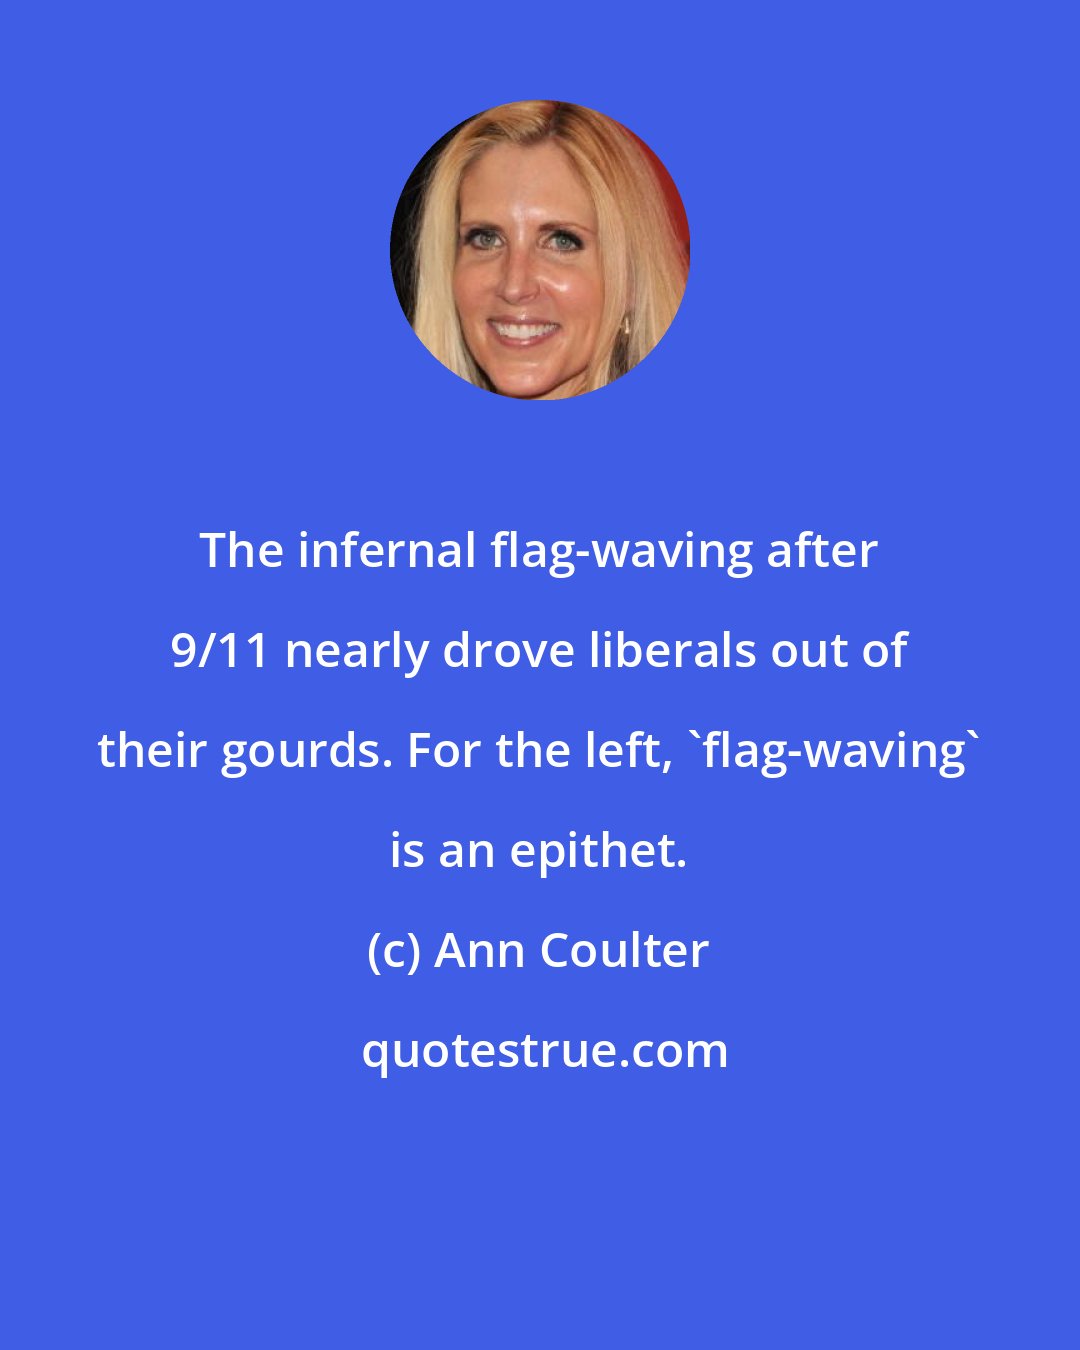 Ann Coulter: The infernal flag-waving after 9/11 nearly drove liberals out of their gourds. For the left, 'flag-waving' is an epithet.